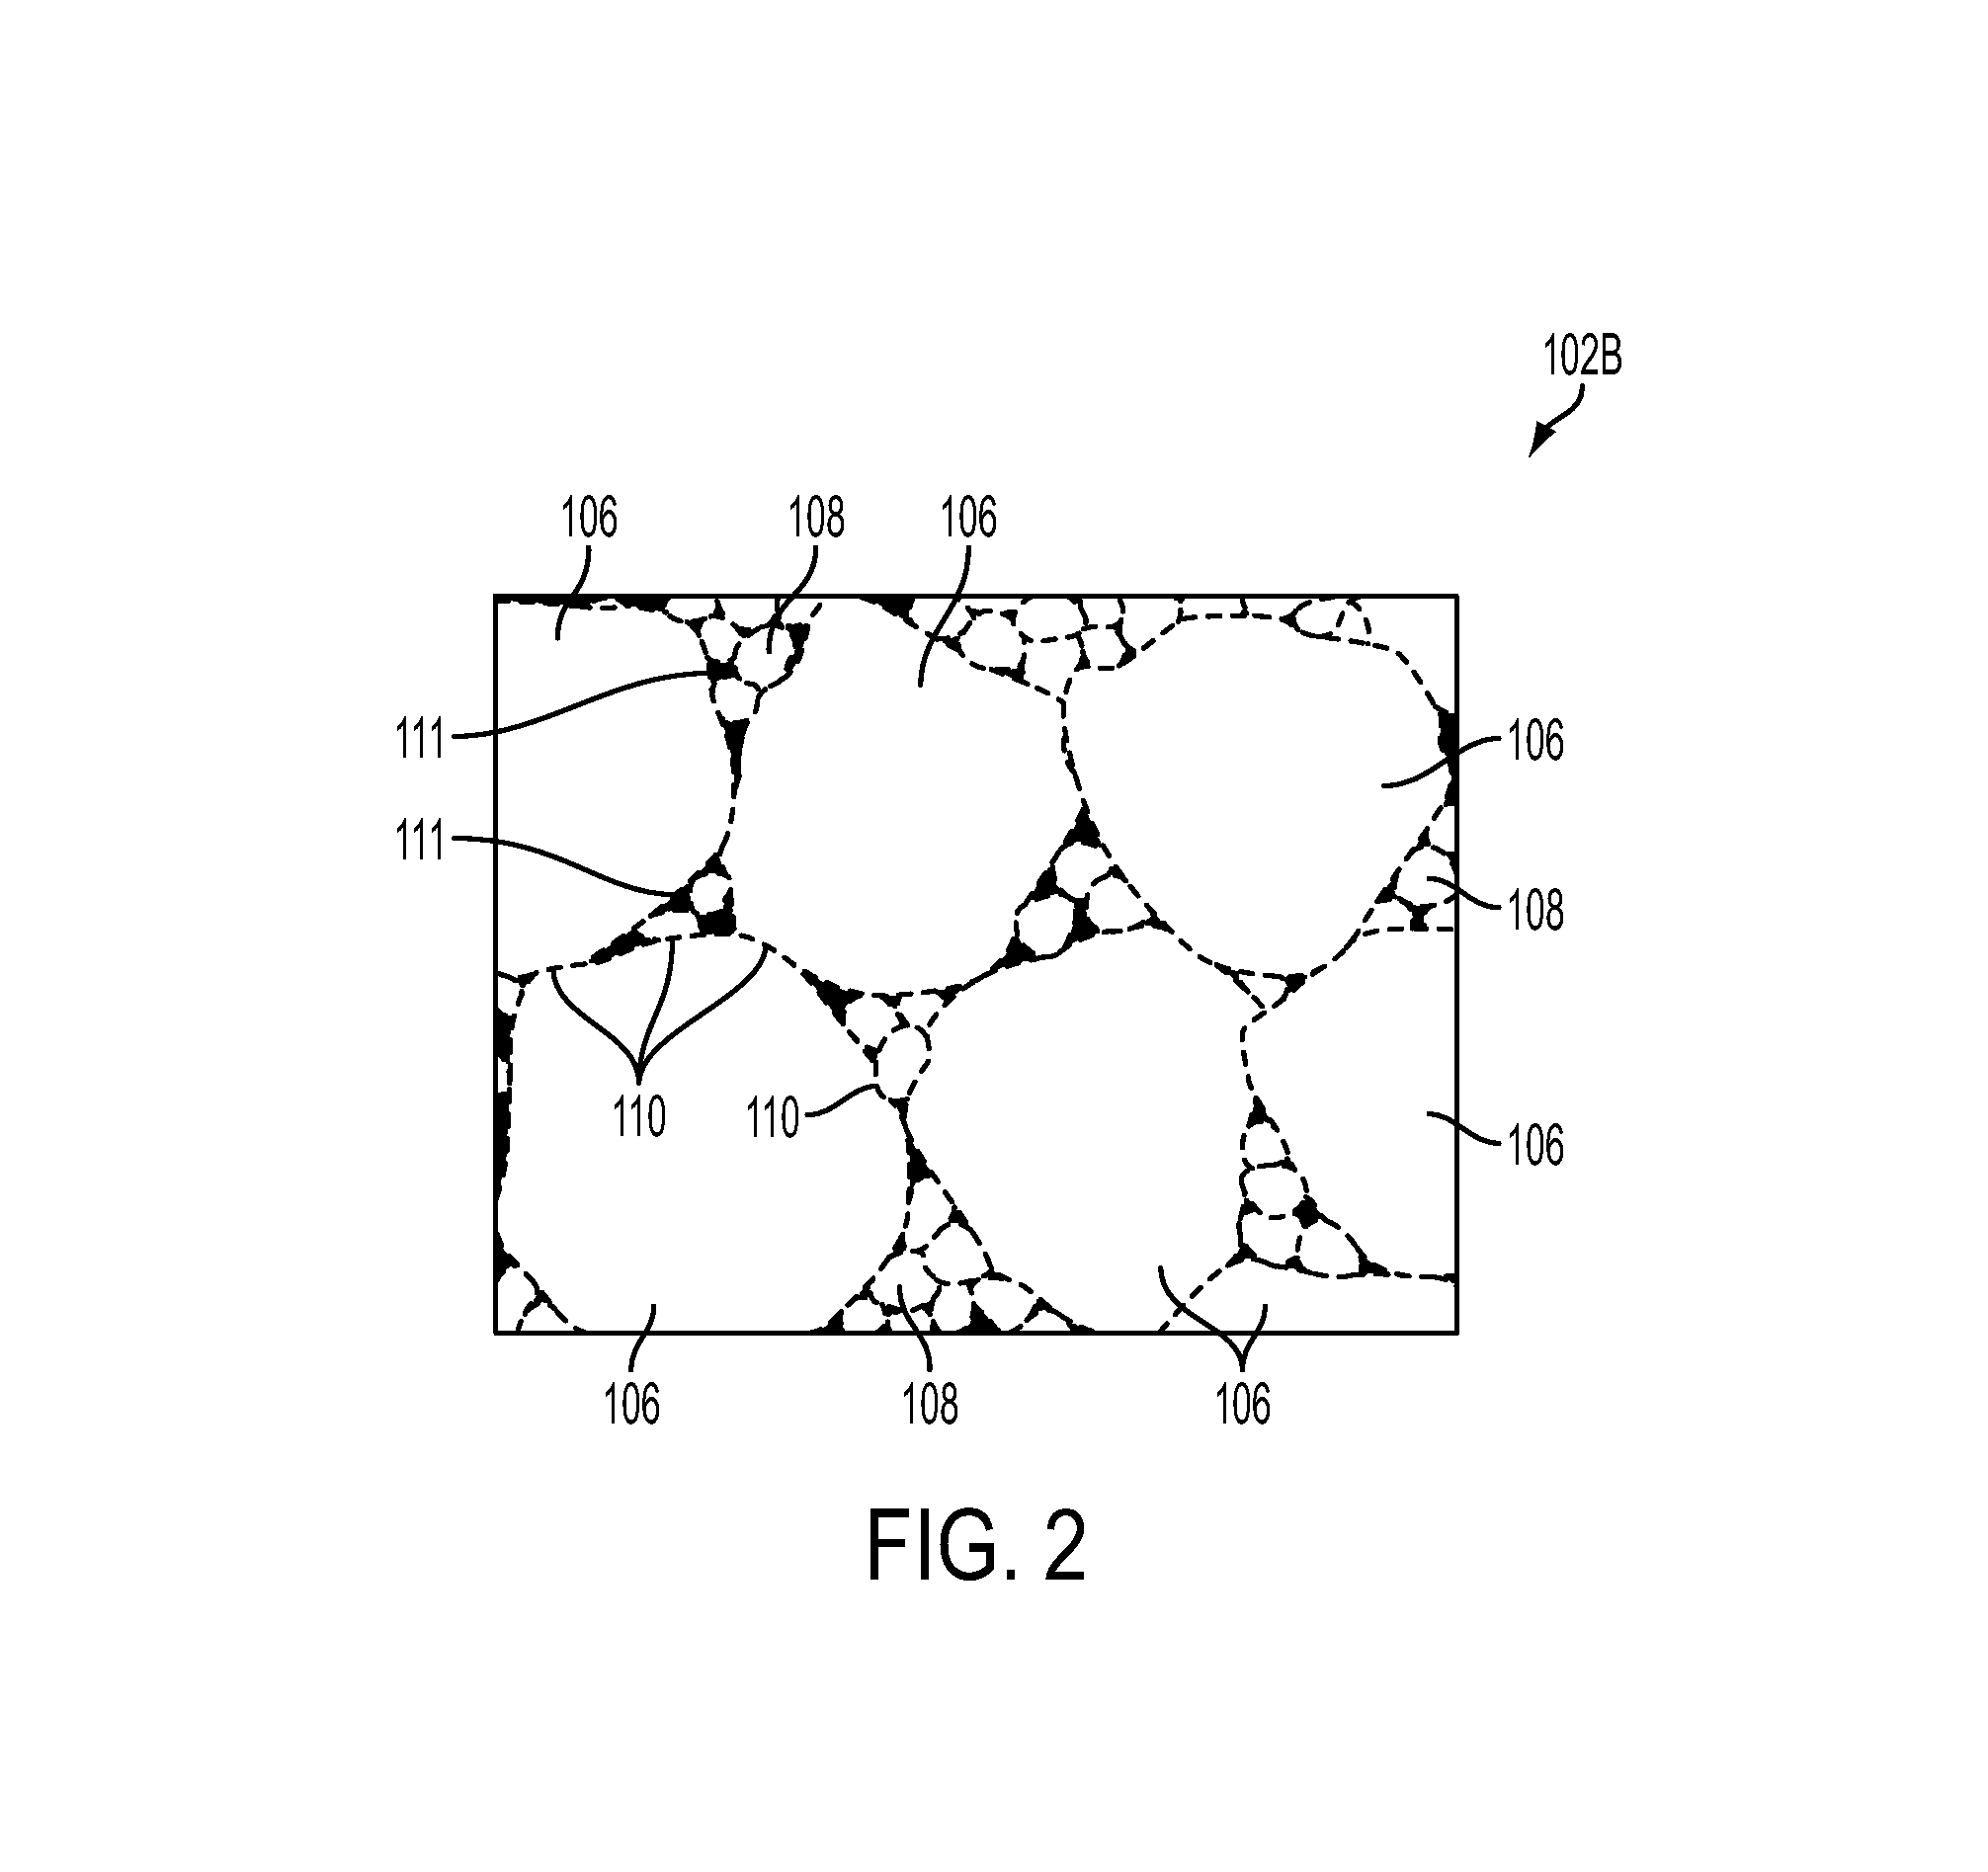 Methods of forming a cutting element for an earth-boring tool, a related cutting element, and an earth-boring tool including such a cutting element